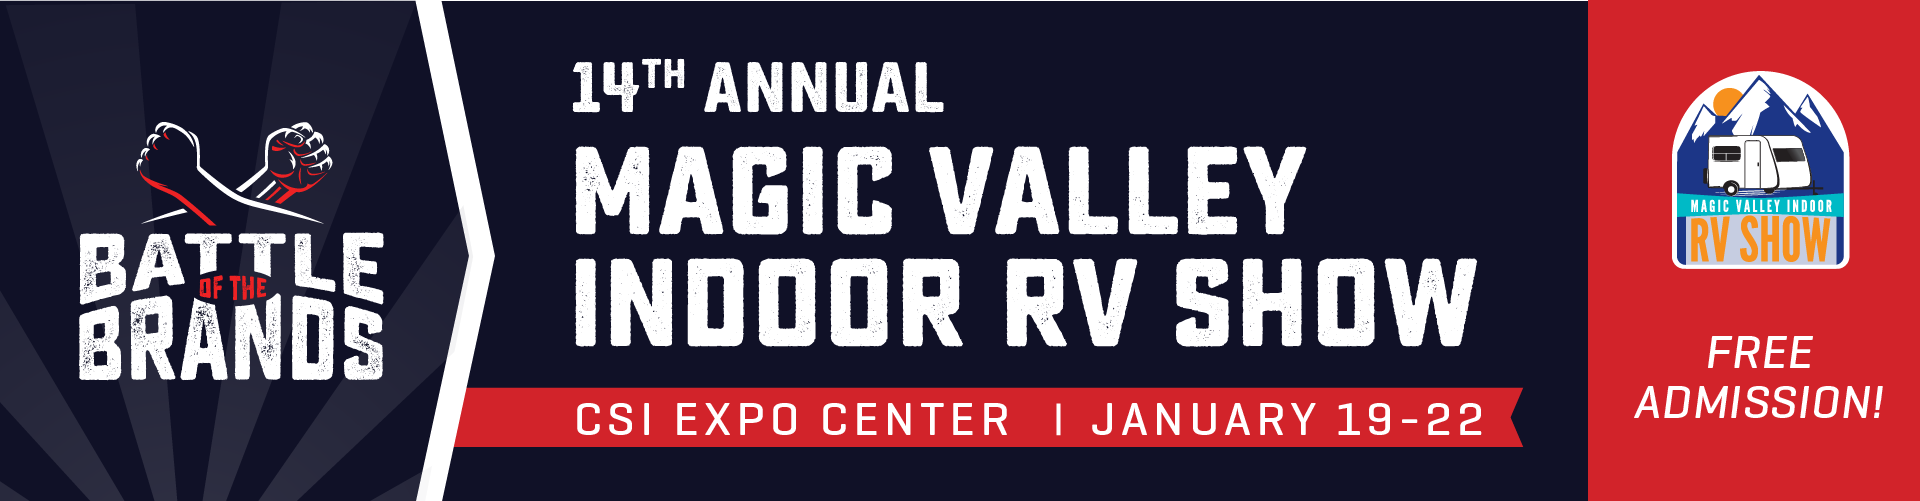 14th Annual Magic Valley Indoor RV Show